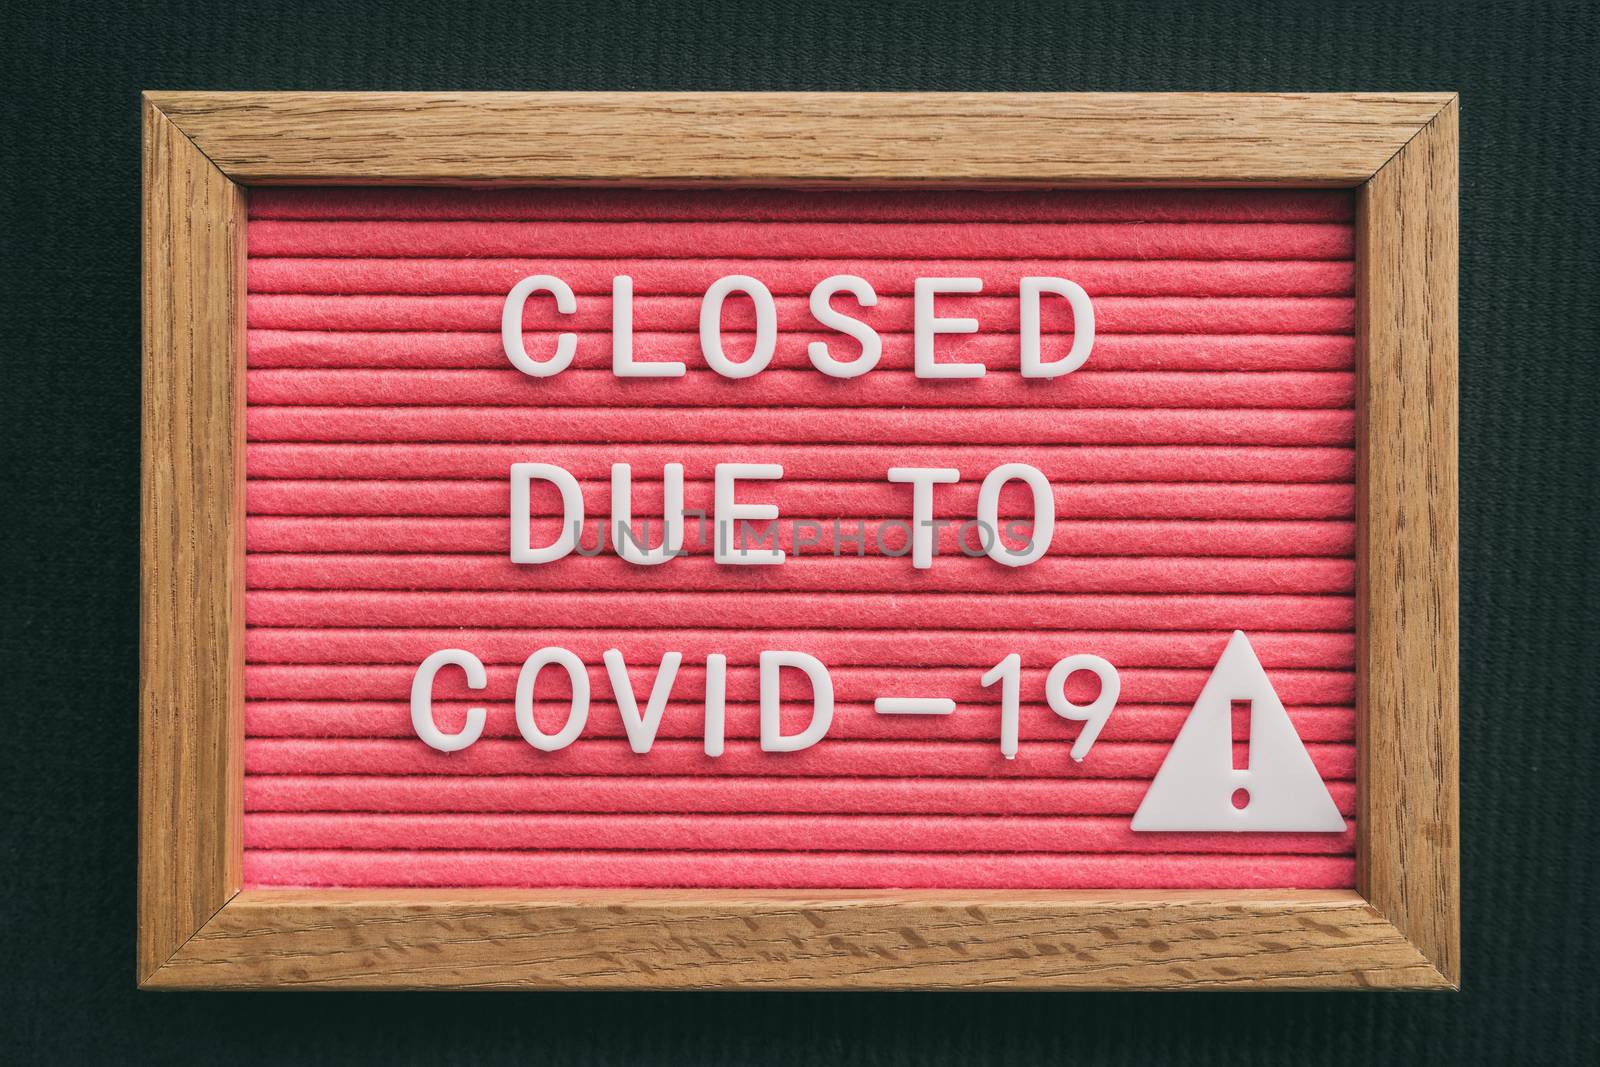 Coronavirus store closure sign. Closed due to COVID-19 message board for retail business COVID-19 pandemic outbreak. Government shutdown of restaurants, bakeries, non essential services. Pink letters.